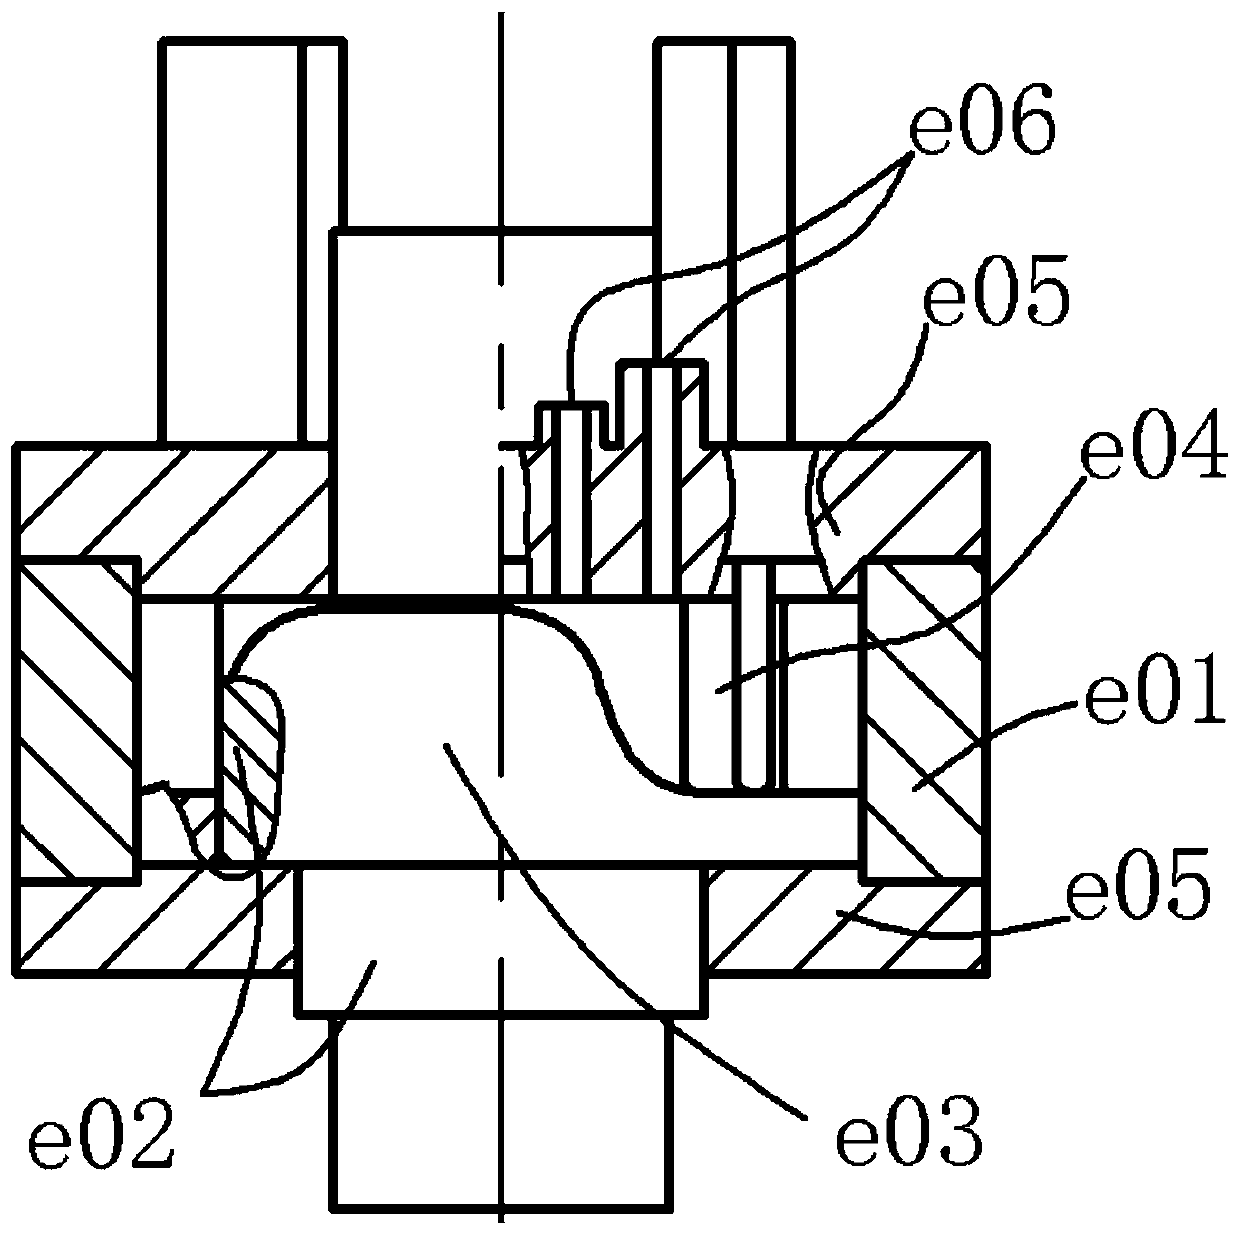 A Cylindrical Cam Rotor Internal Combustion Engine Power System